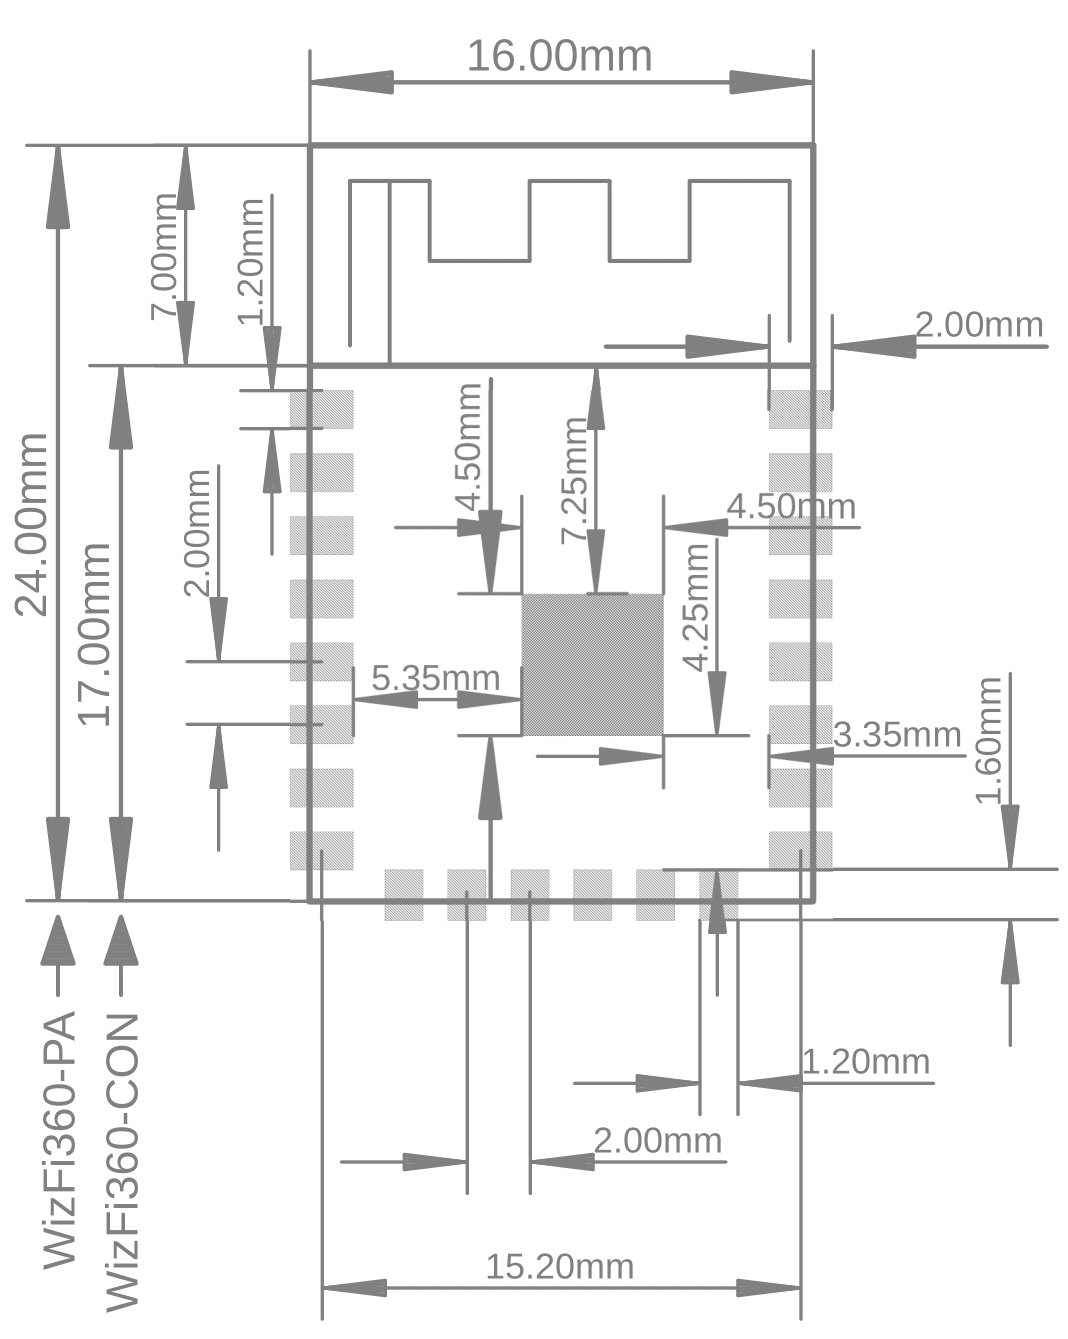 Figure 6. Recommended PCB Land Pattern of WizFi360